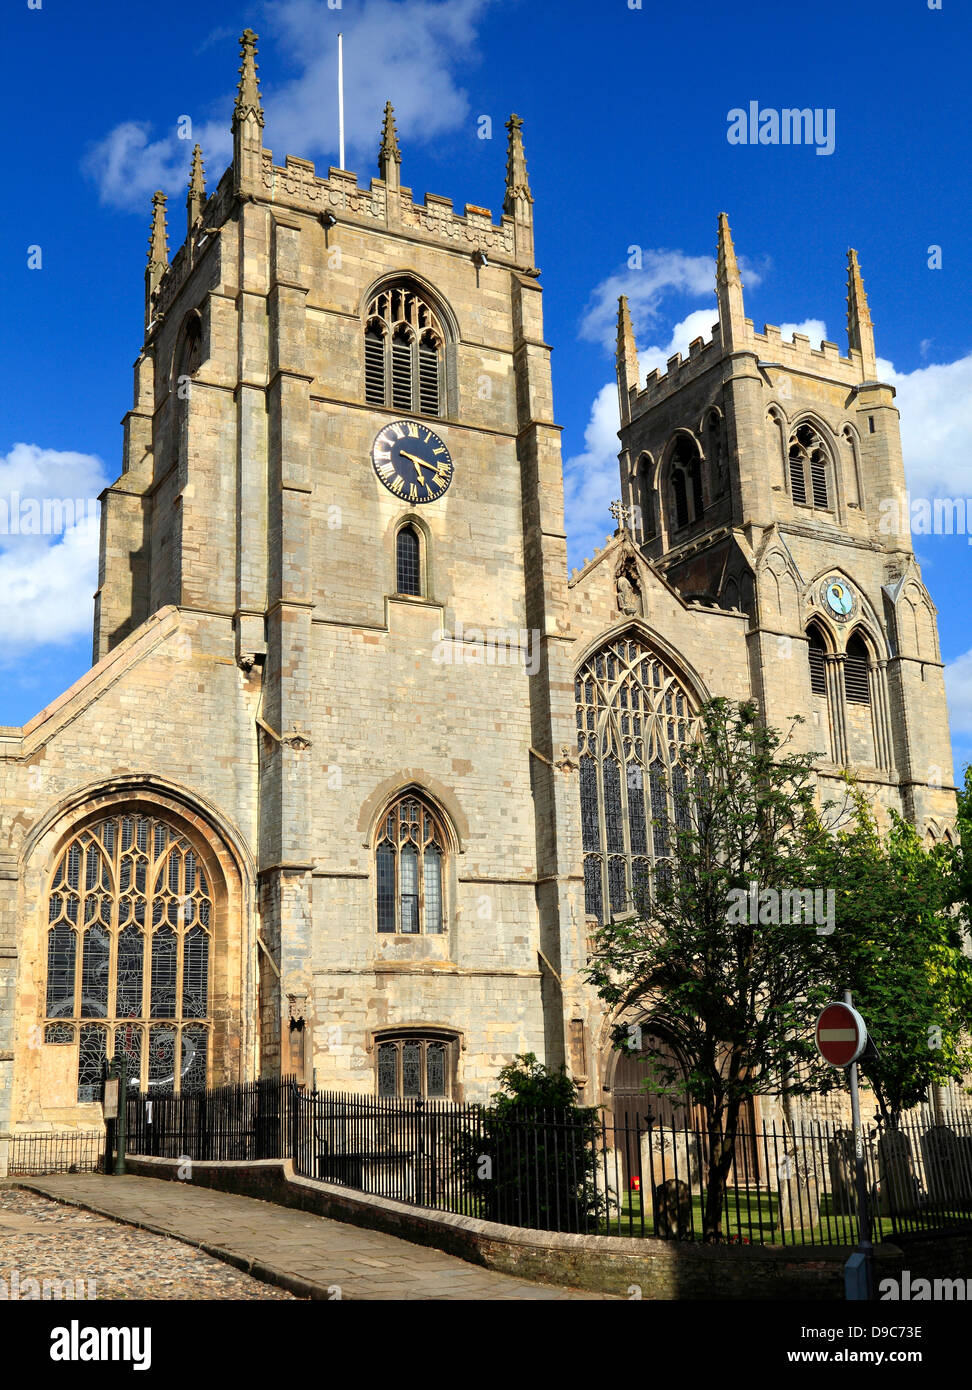 Kings Lynn, Norfolk, St. Margaret's Church, west towers, England UK, English town medieval churches Stock Photo